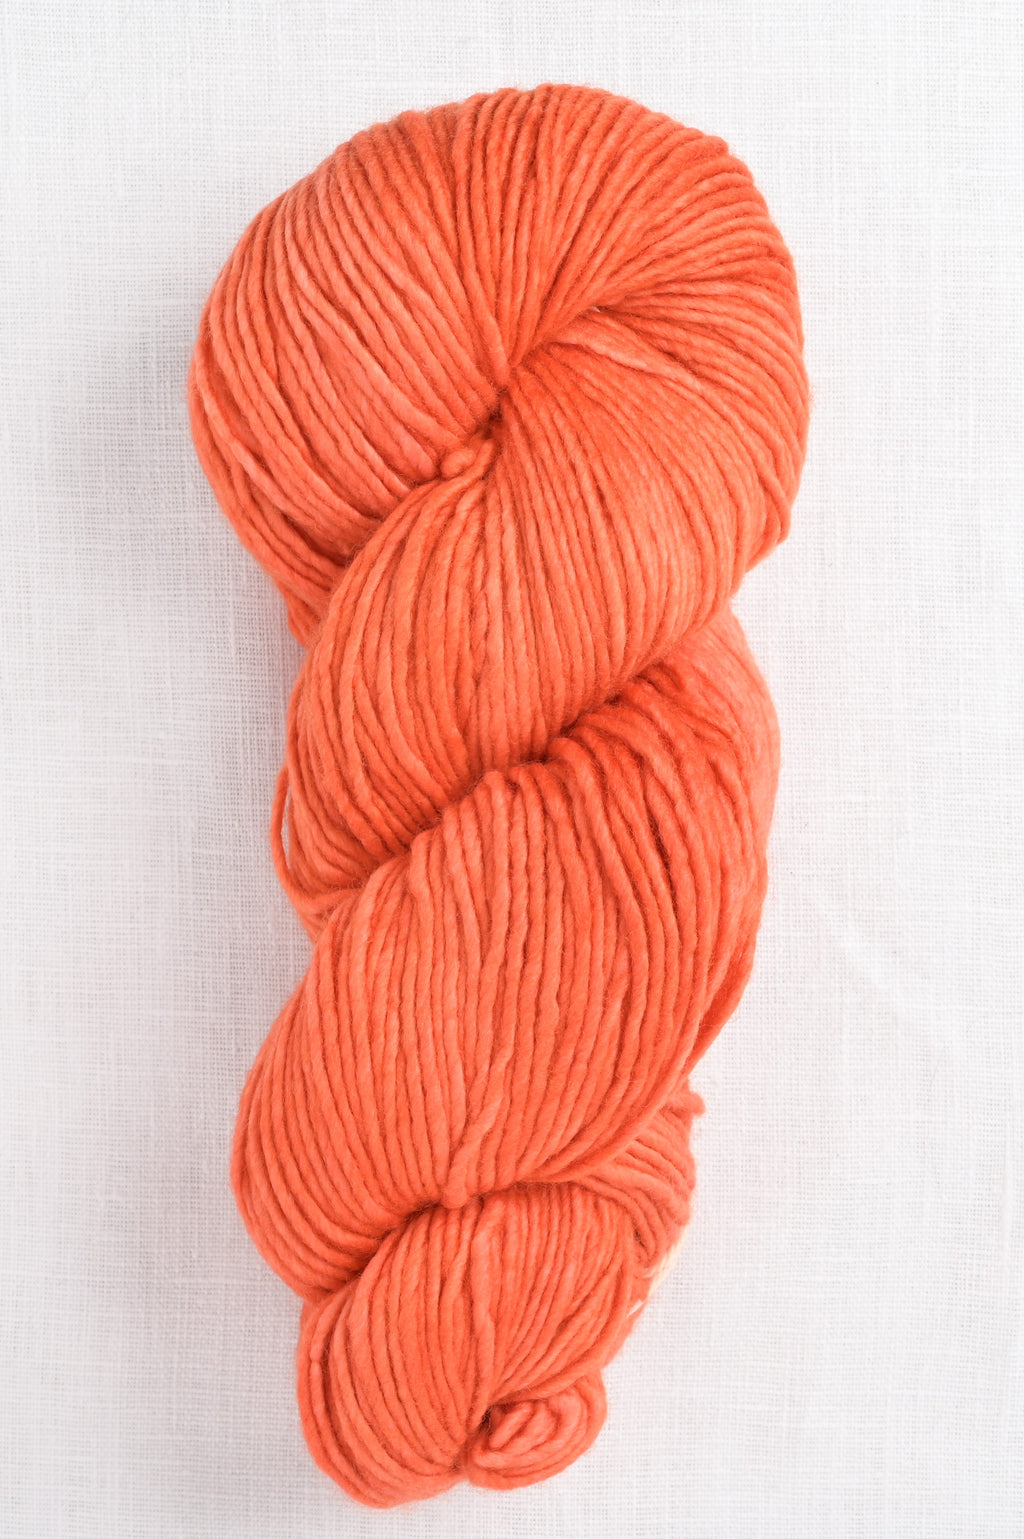 Worsted-Weight Yarn: Hand-dyed with Dahlia Flowers (Lot 2)